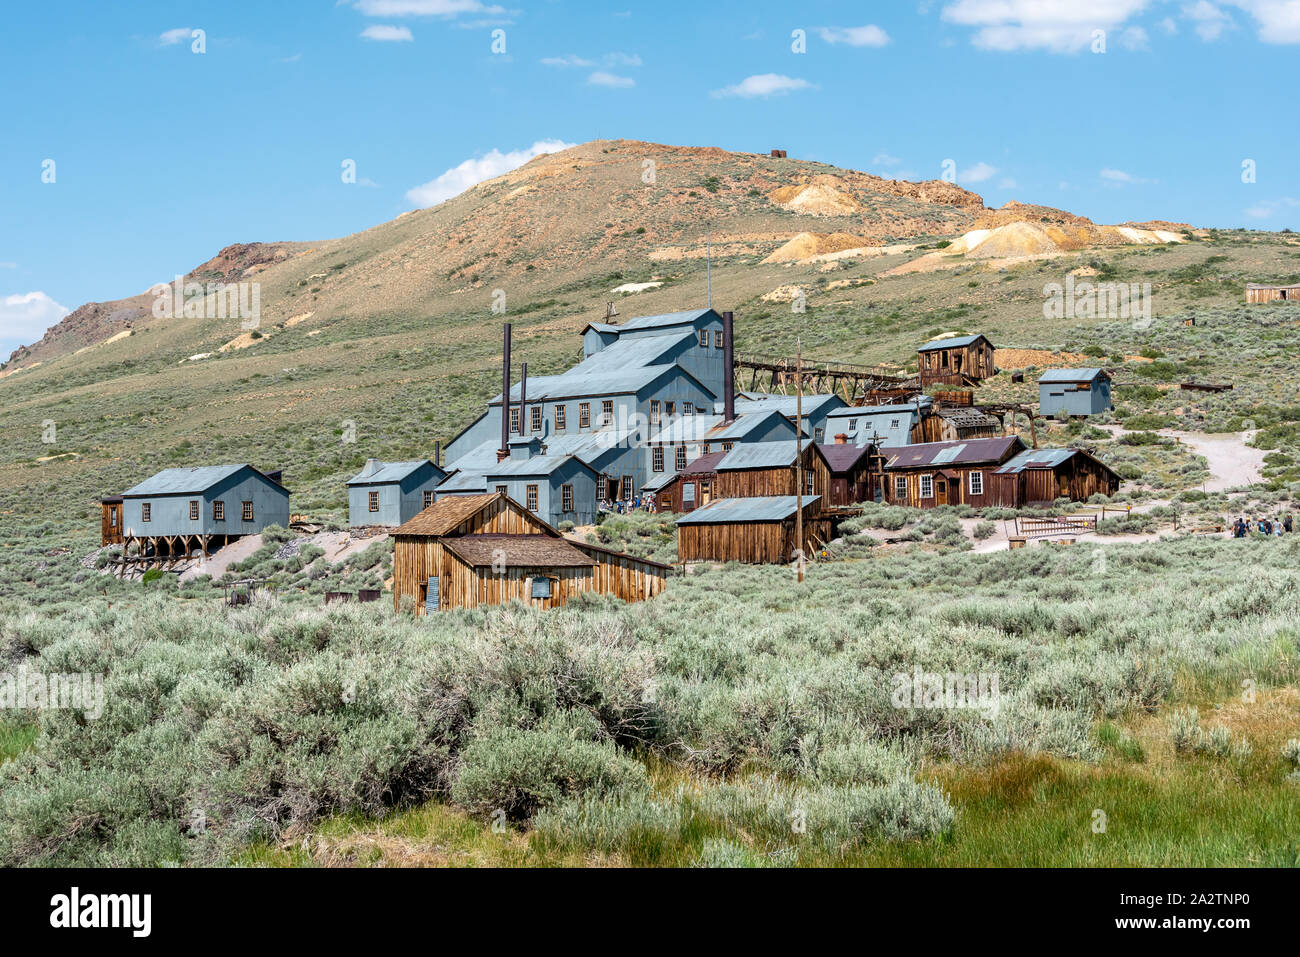 Standard Consolidated Mining Company Stamp Mill at Bodie State Historic Park near Highway 395 in the Eastern Sierra of California. Stock Photo